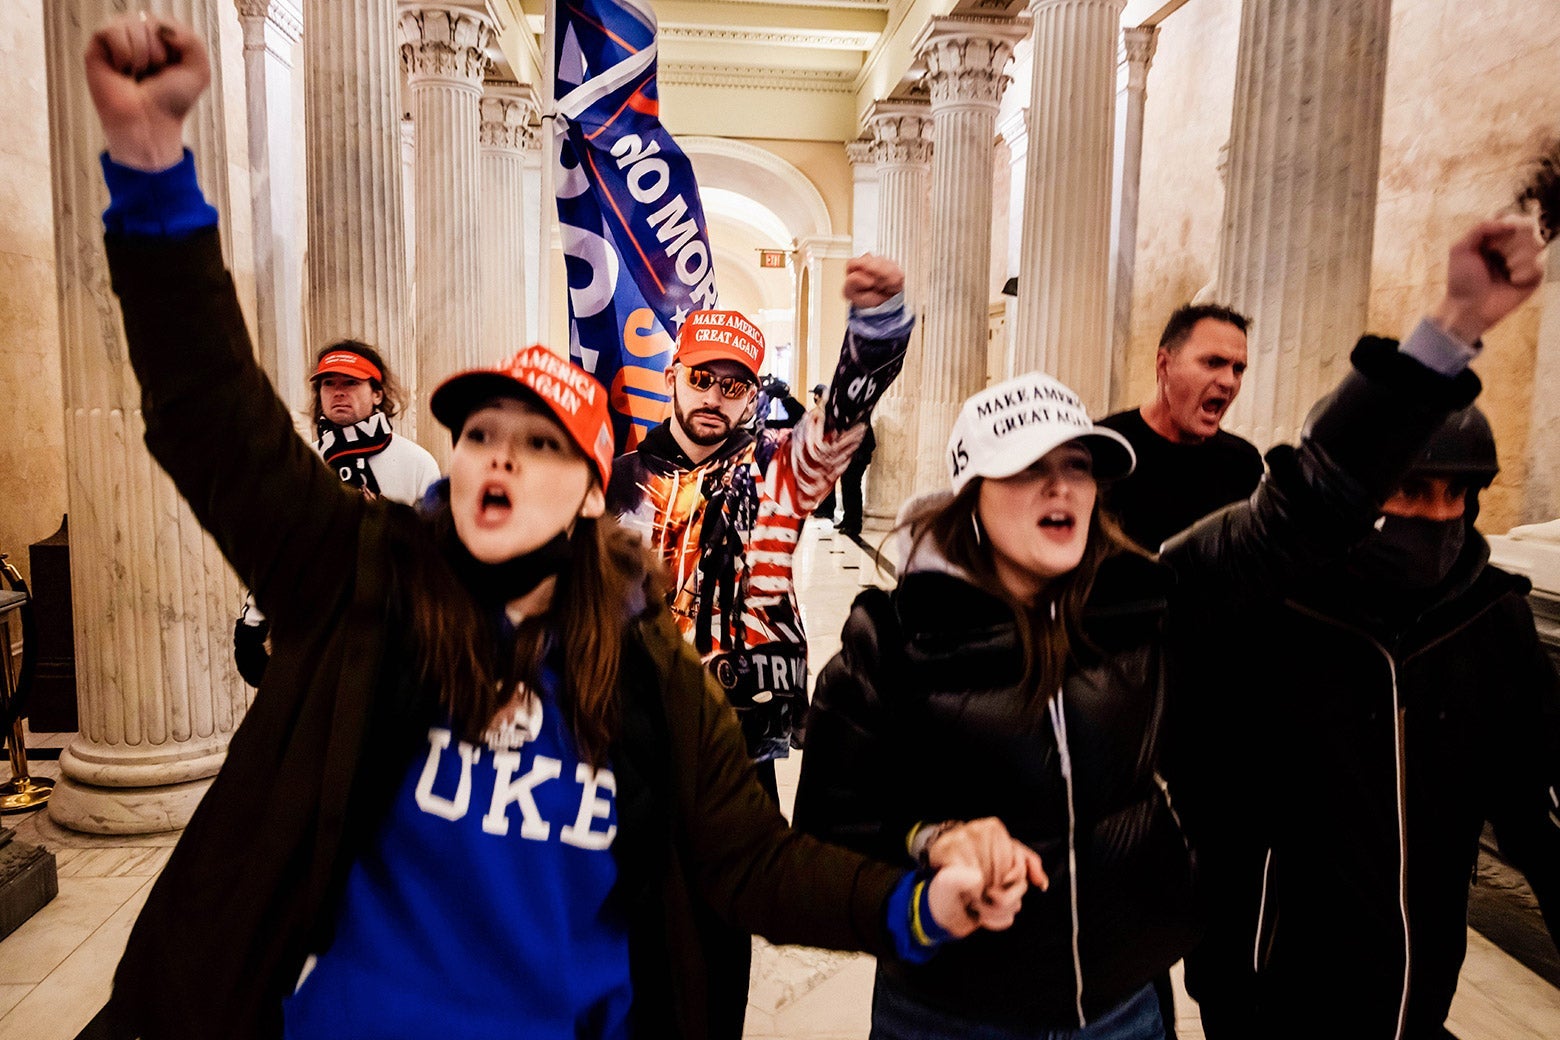 Two women in MAGA hats hold hands and raise their other hands in fists as they walk down a hallway in the Capitol with a small group of people.